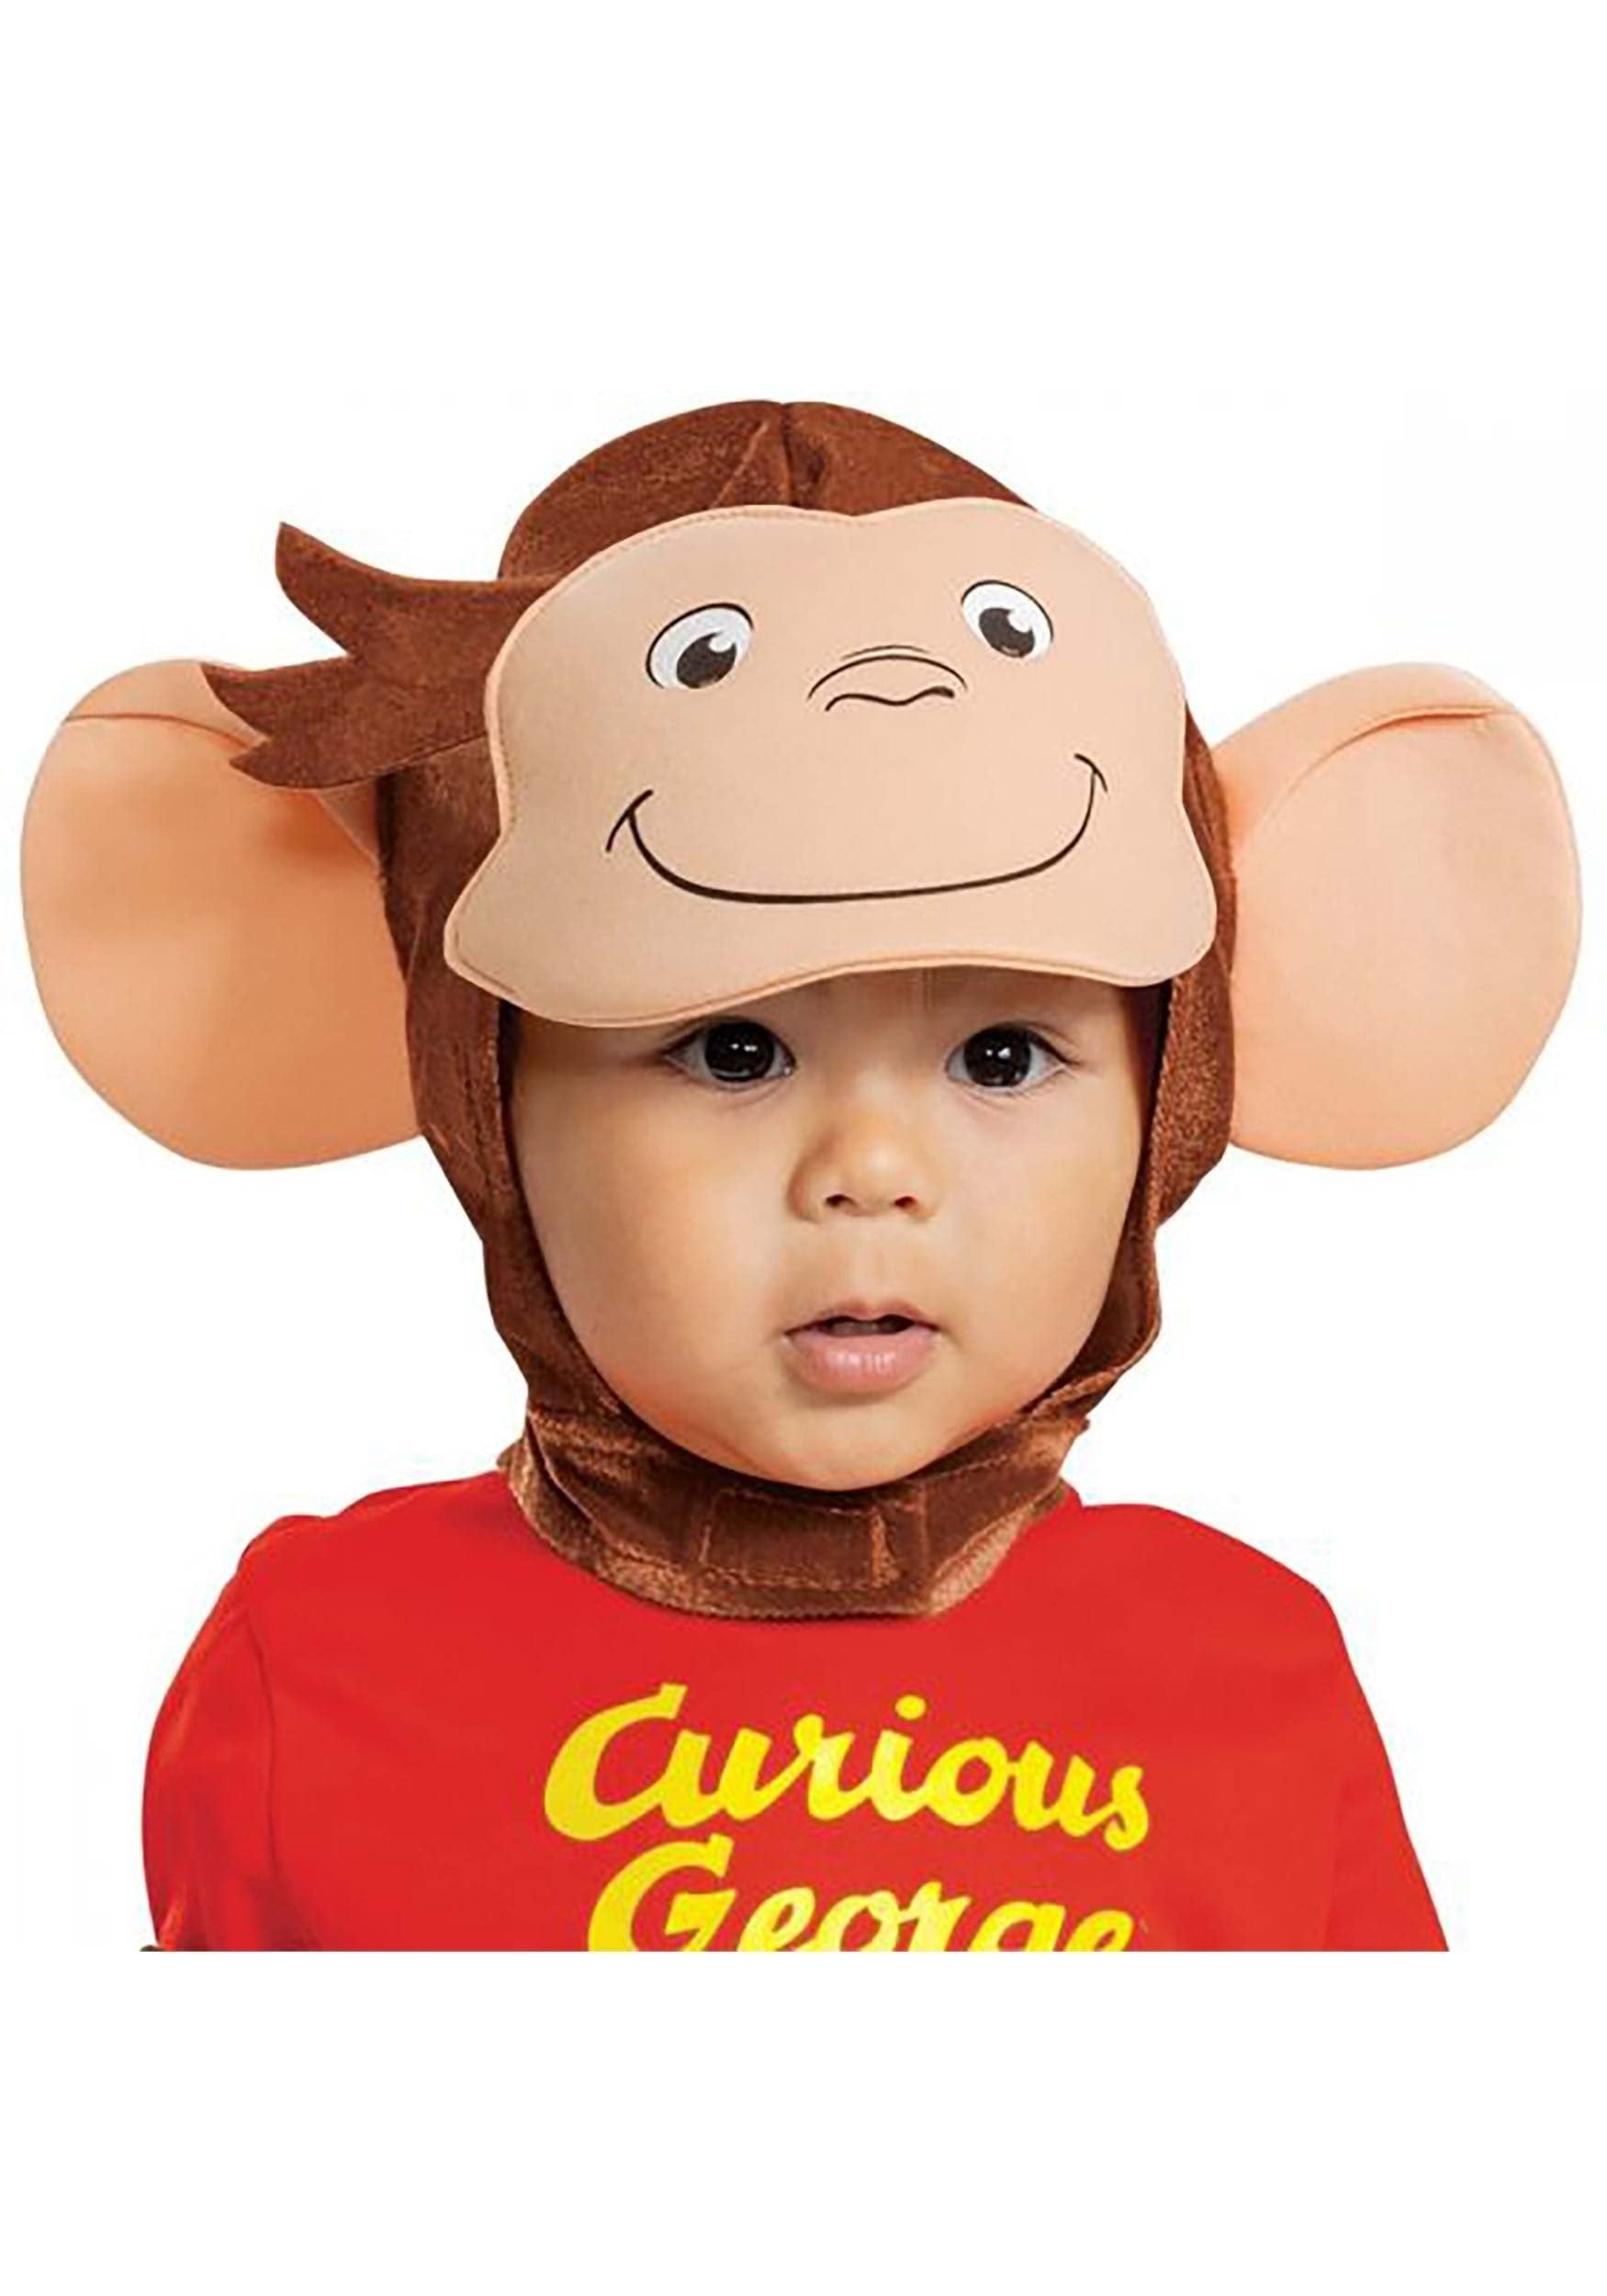 Disguise baby boys Curious George Costume, Official Curious George Onesie Infant and Toddler Costumes, As Shown, Size 6-12 months US